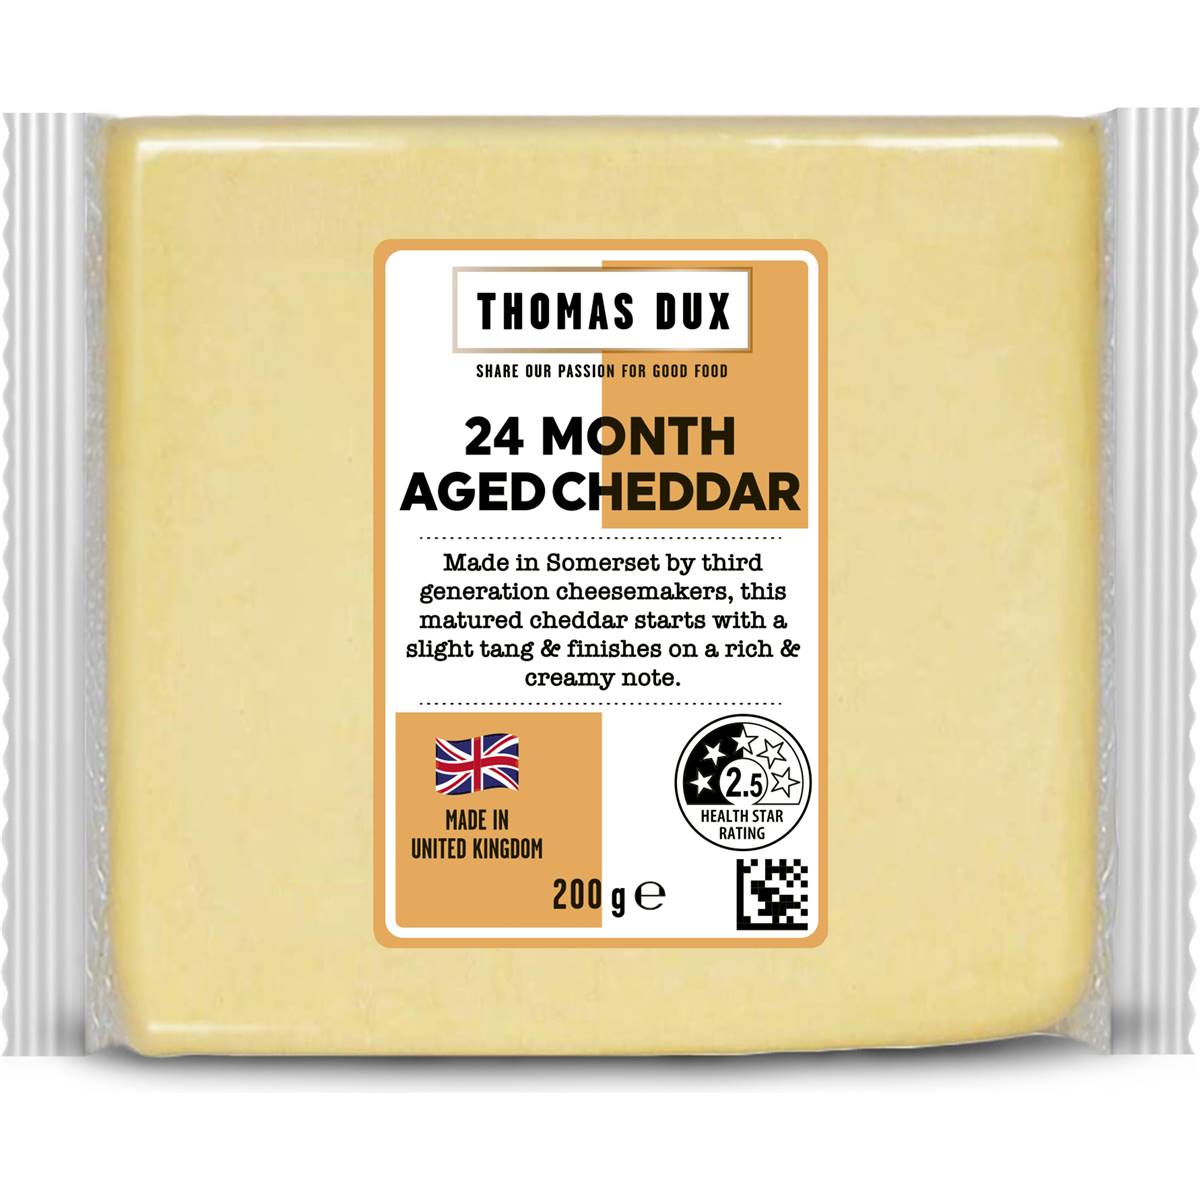 Calories in Thomas Dux Aged Cheddar 24 Months